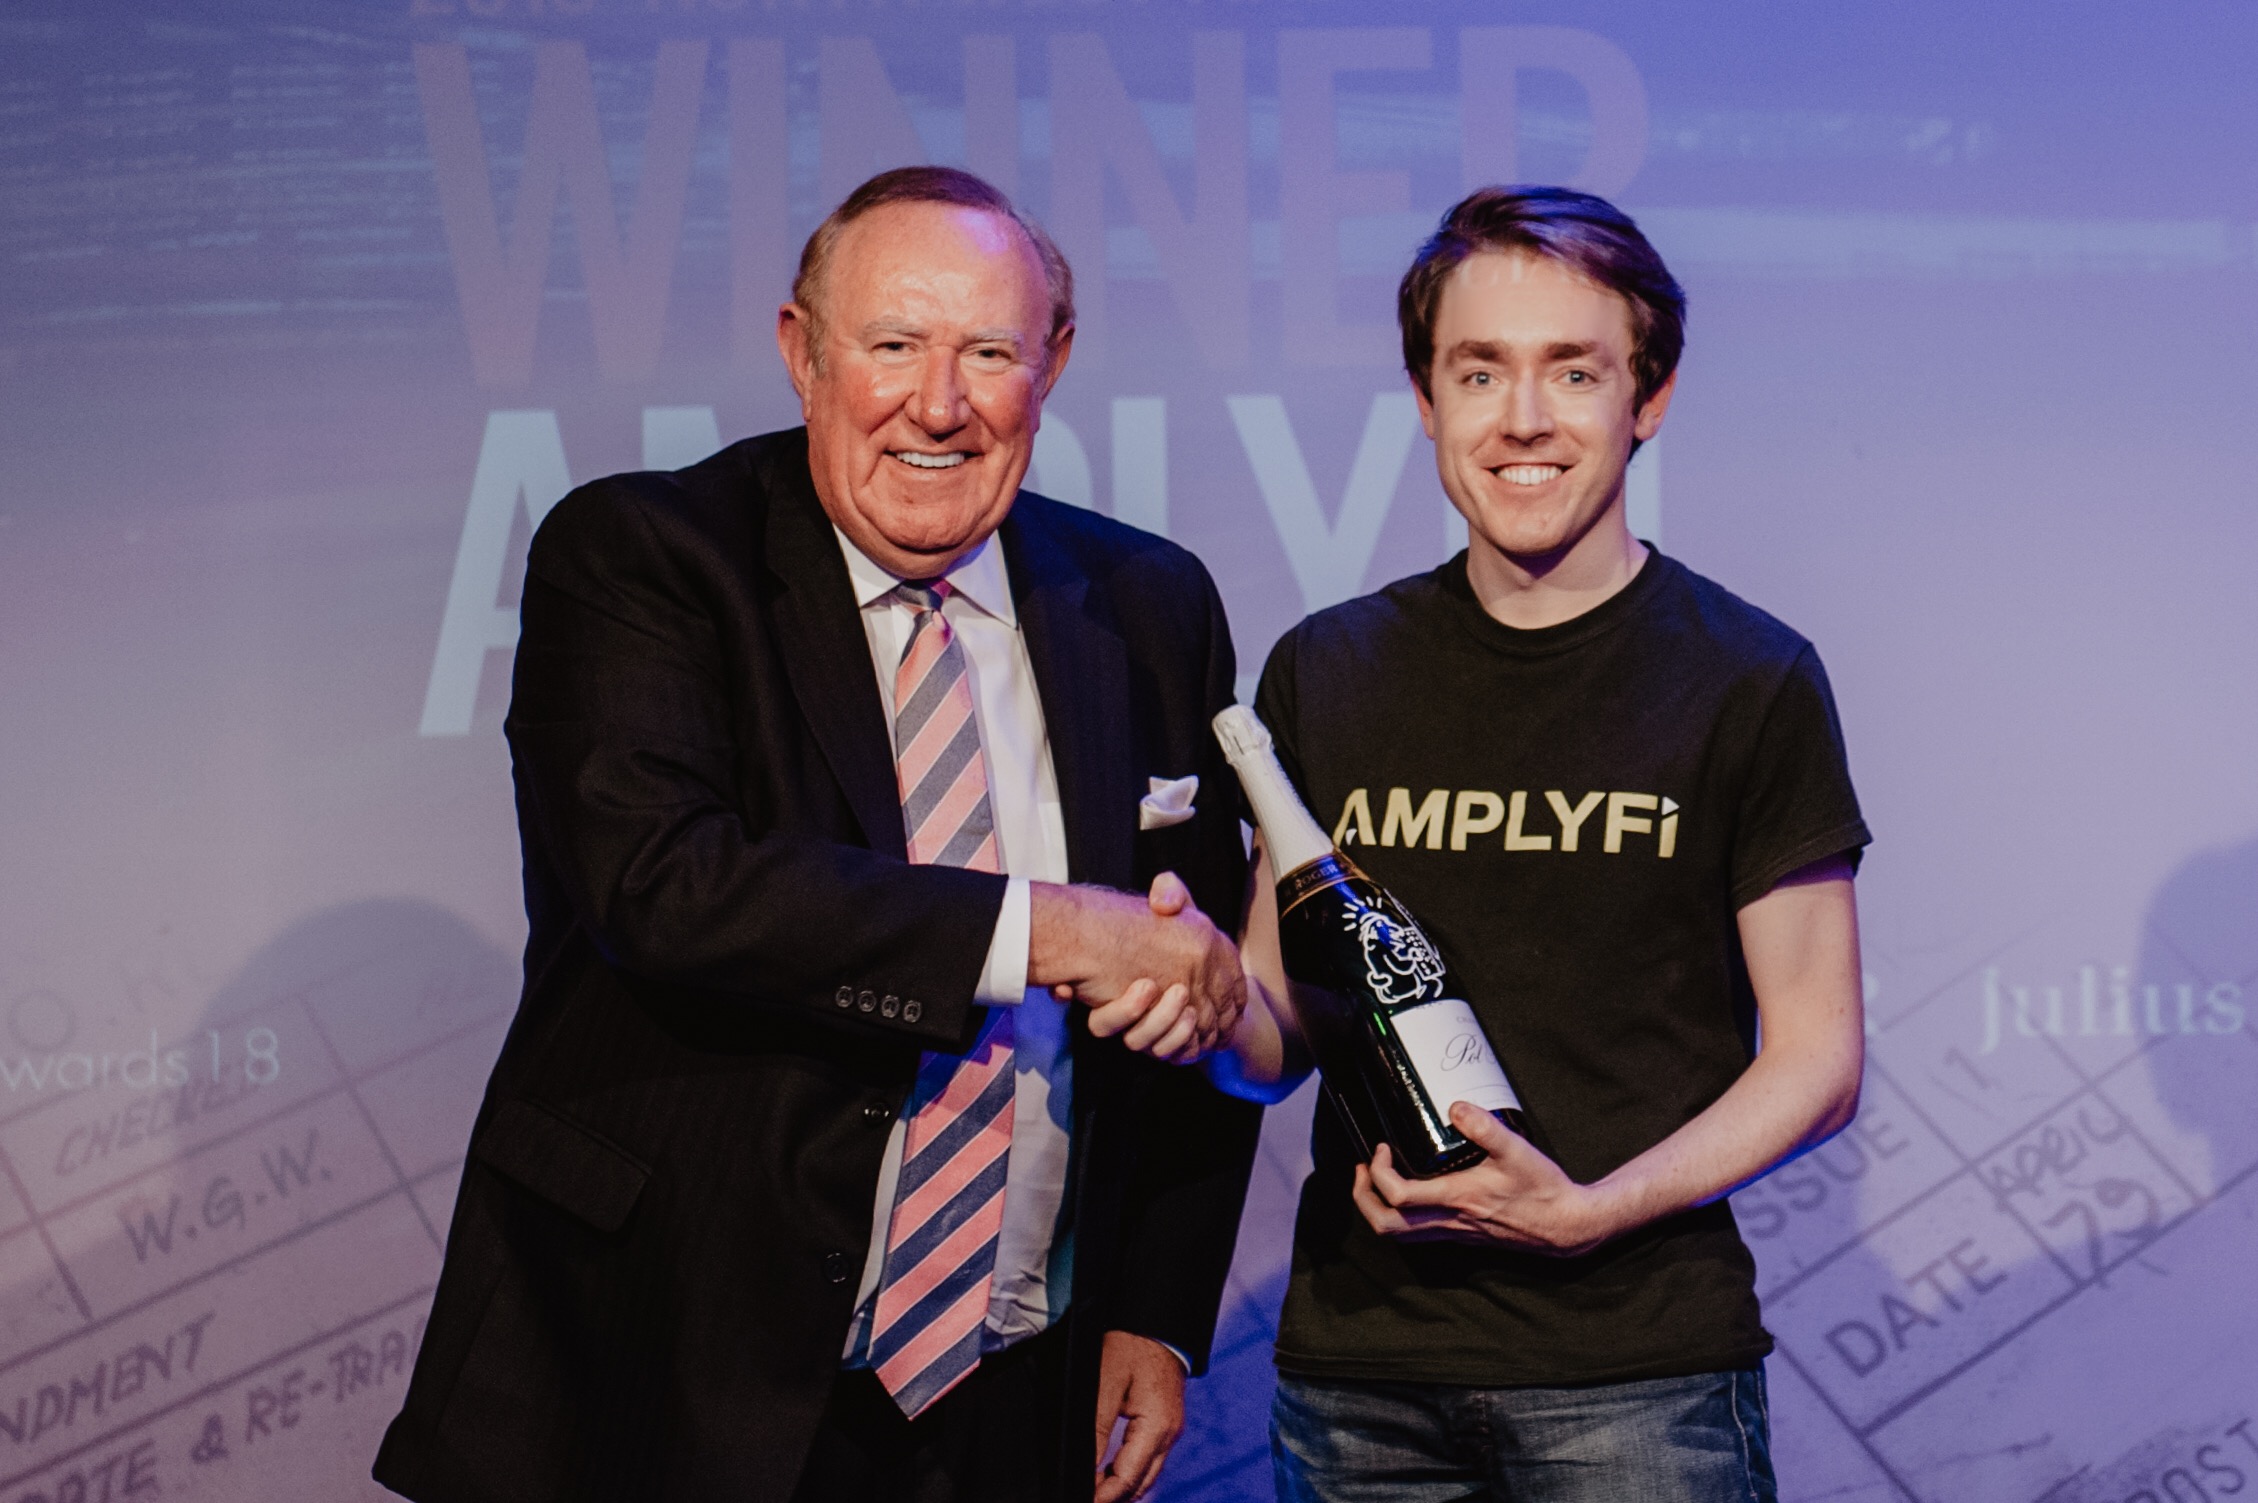 Daniel James receiving The Spectator Economic Disruptor of the Year Award from Andrew Neil